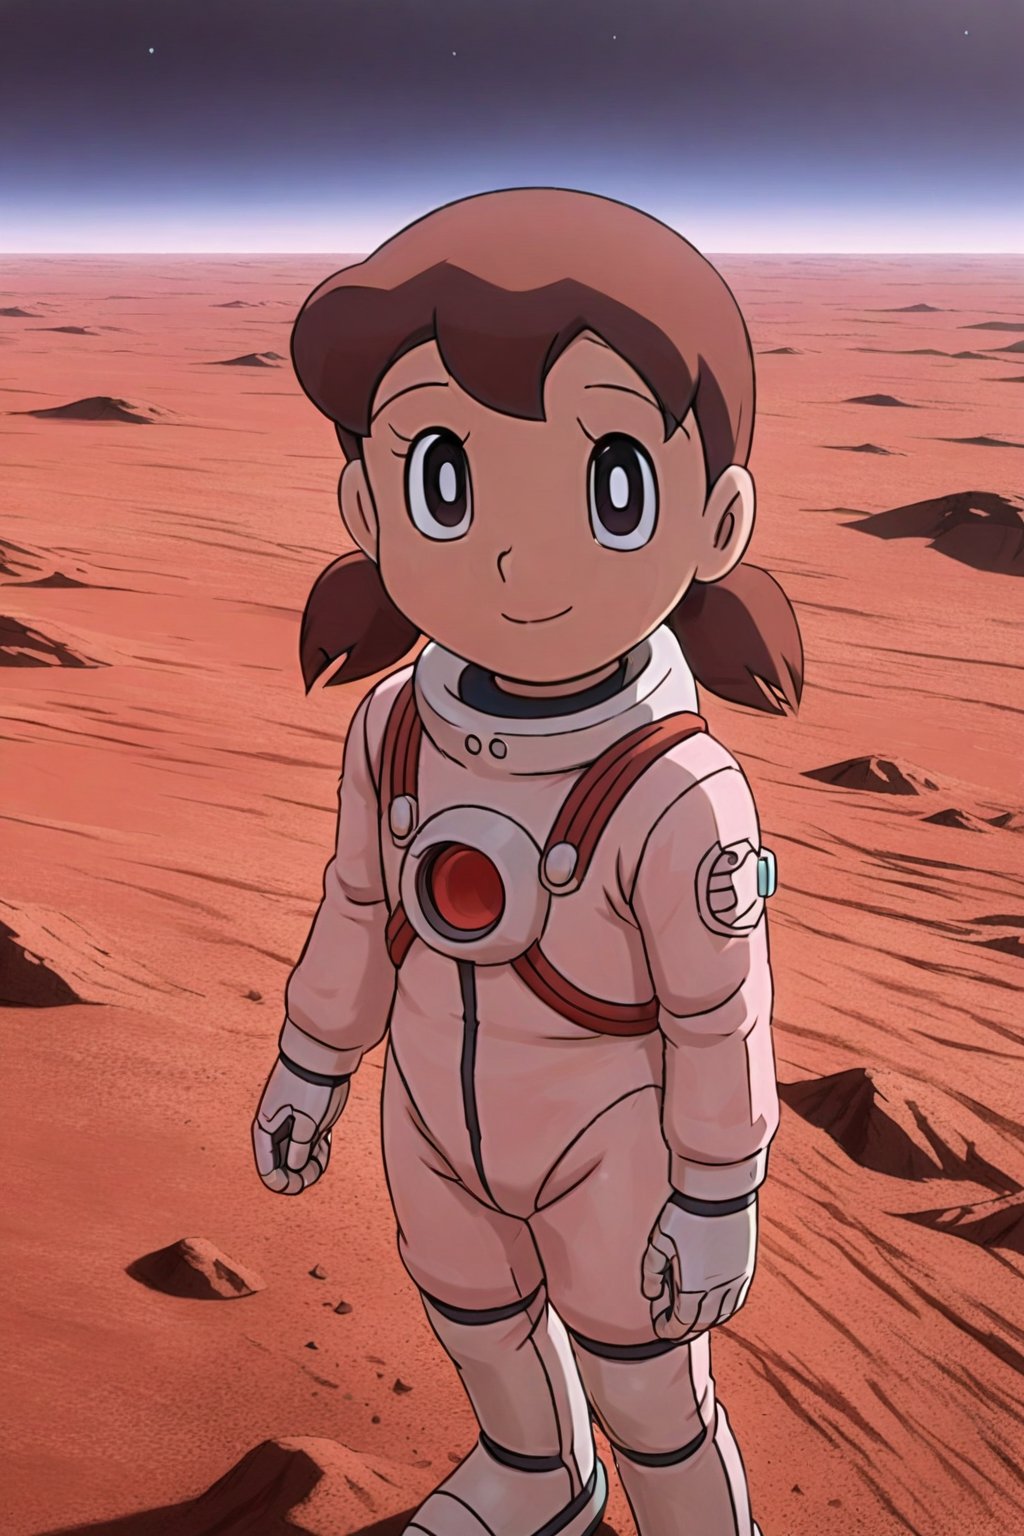 (masterpiece), best quality, expressive eyes, perfect face, anime coloring, 
minamoto shizuka, smile, Girl in a spacesuit stepping onto the surface of Mars, Earth visible in the distance, vast red landscape, futuristic colony in the background, sense of wonder and exploration, epic sci-fi scene, hyper-realistic detail